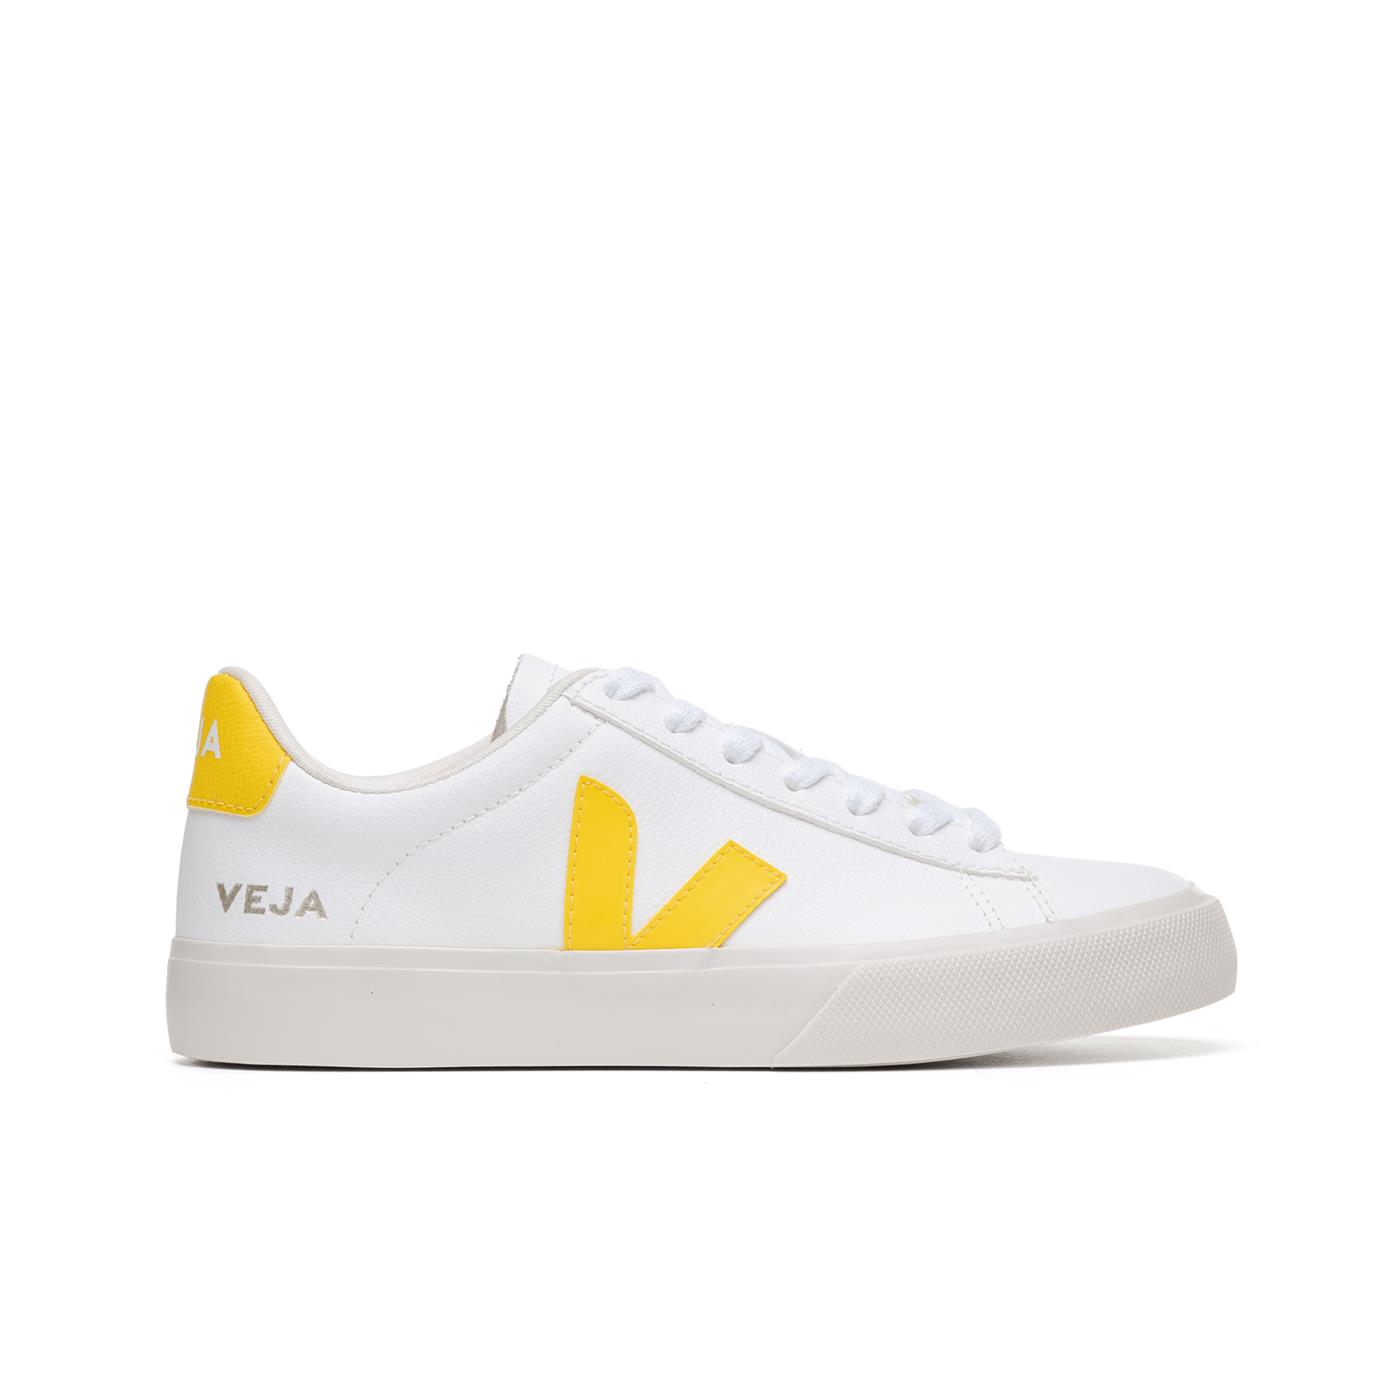 Arqueólogo compilar Botánica Sneakers VEJA Campo Chromefree White for Woman | SadtuShops | leather  sneakers veja shoes extra white camel | CP0502290